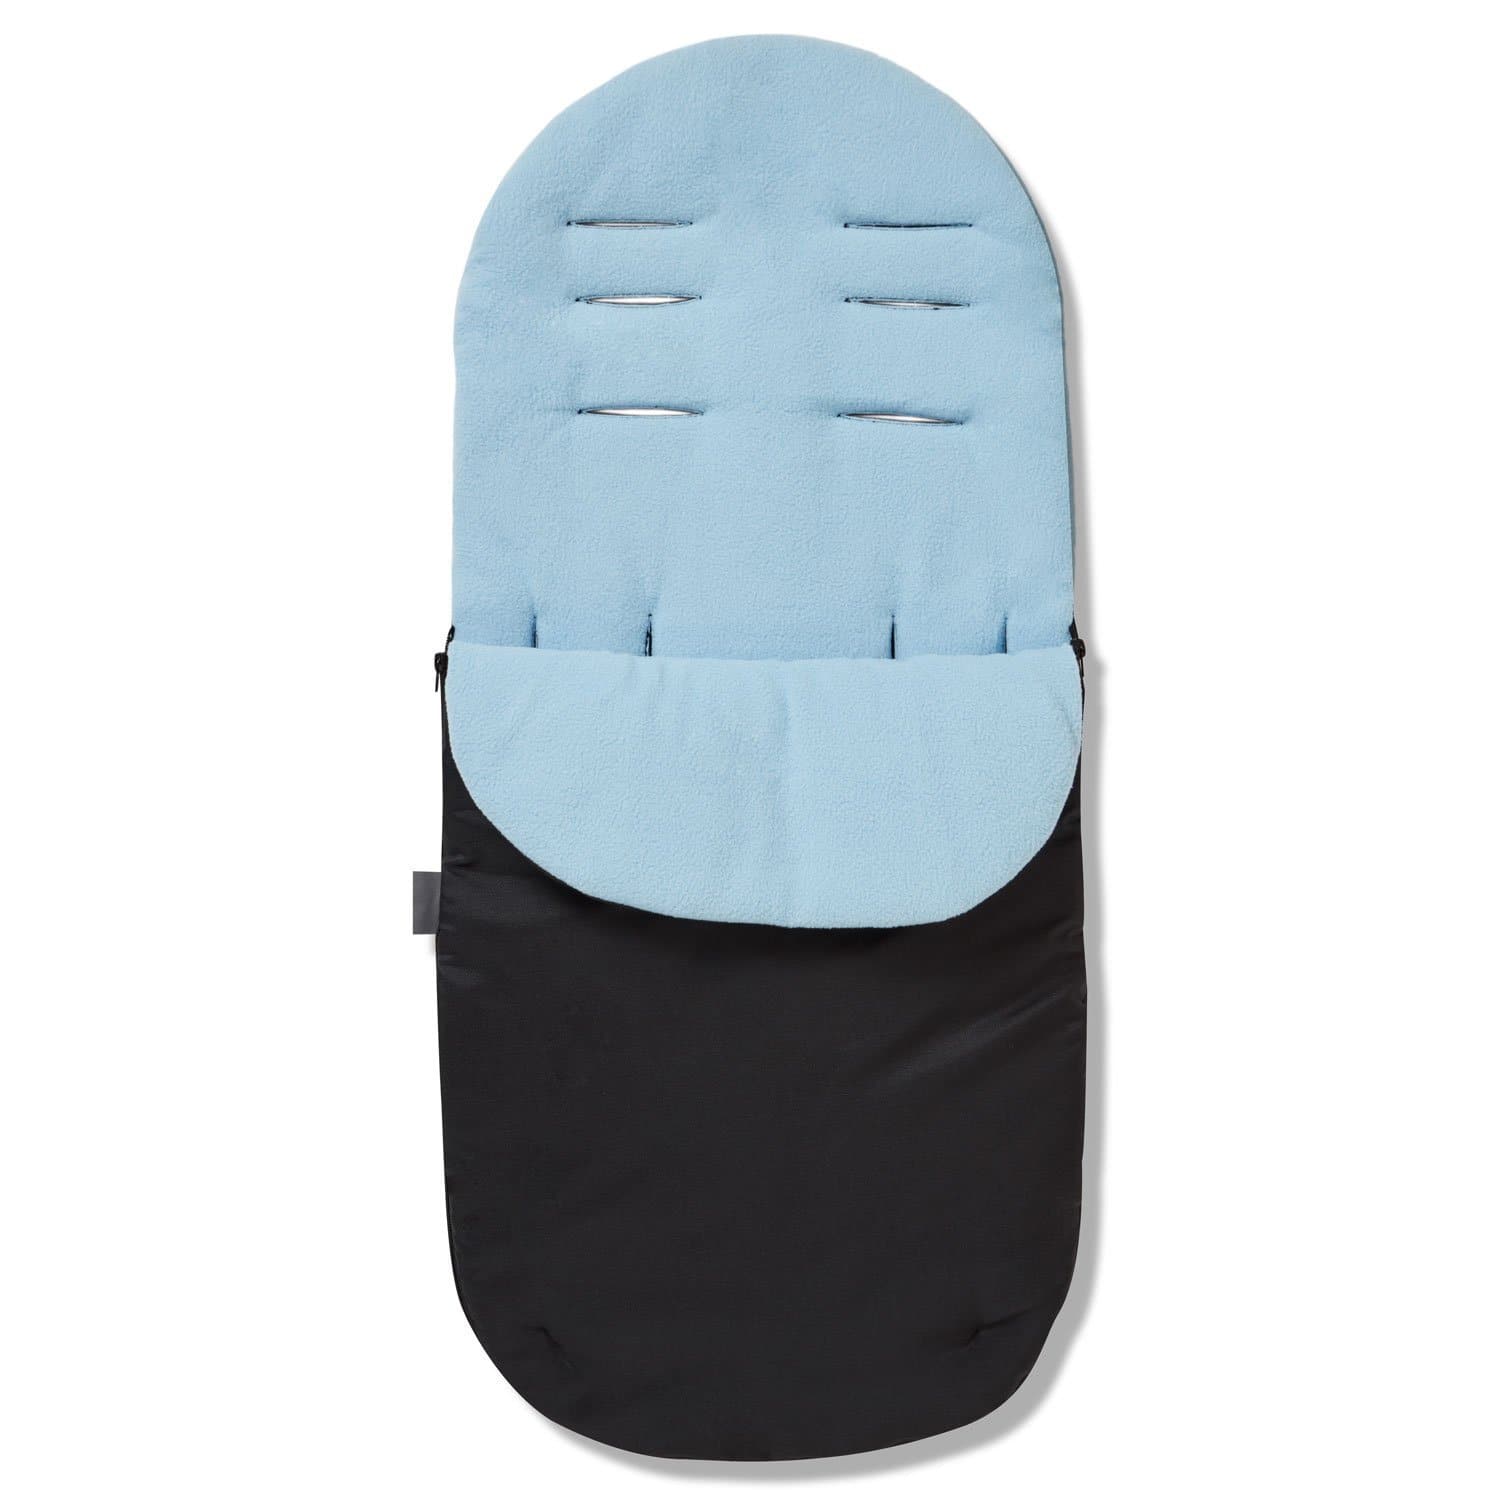 Footmuff / Cosy Toes Compatible with Concord - Light Blue / Fits All Models | For Your Little One